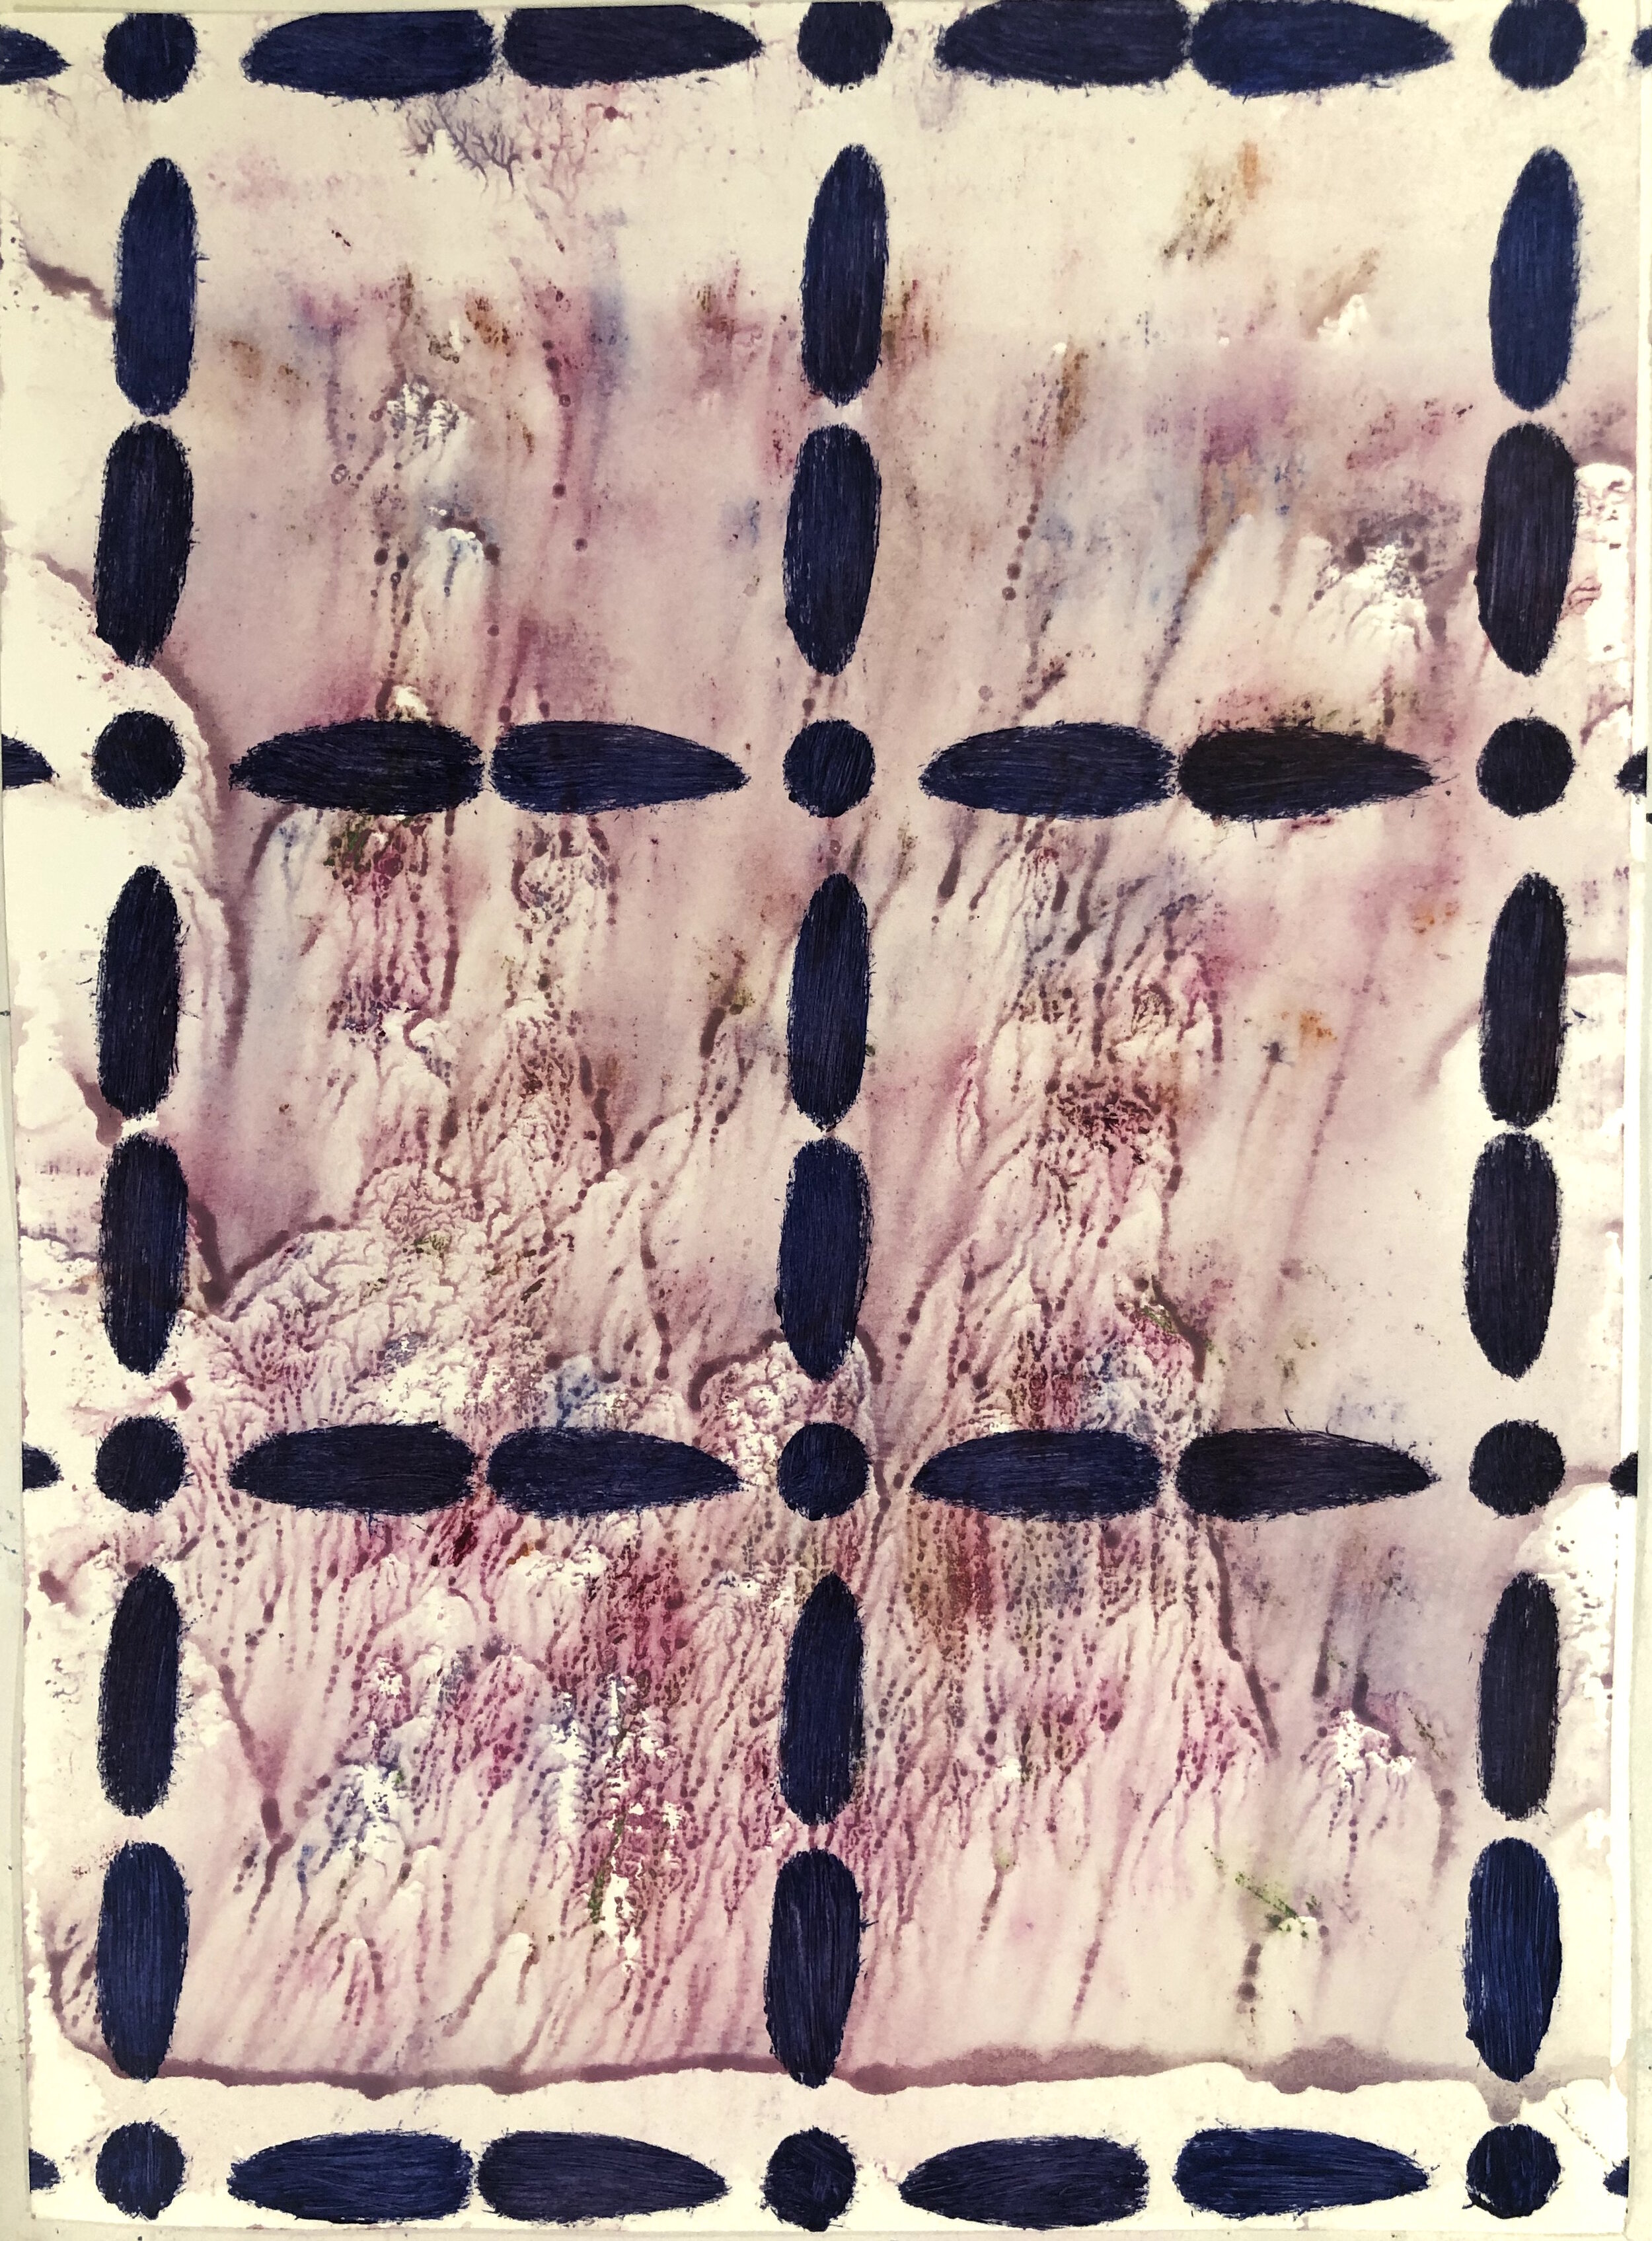 markperry-grid-painting-mauve-violet-flower-stencil-decorative-worksonpaper-abstract-paintings.jpg